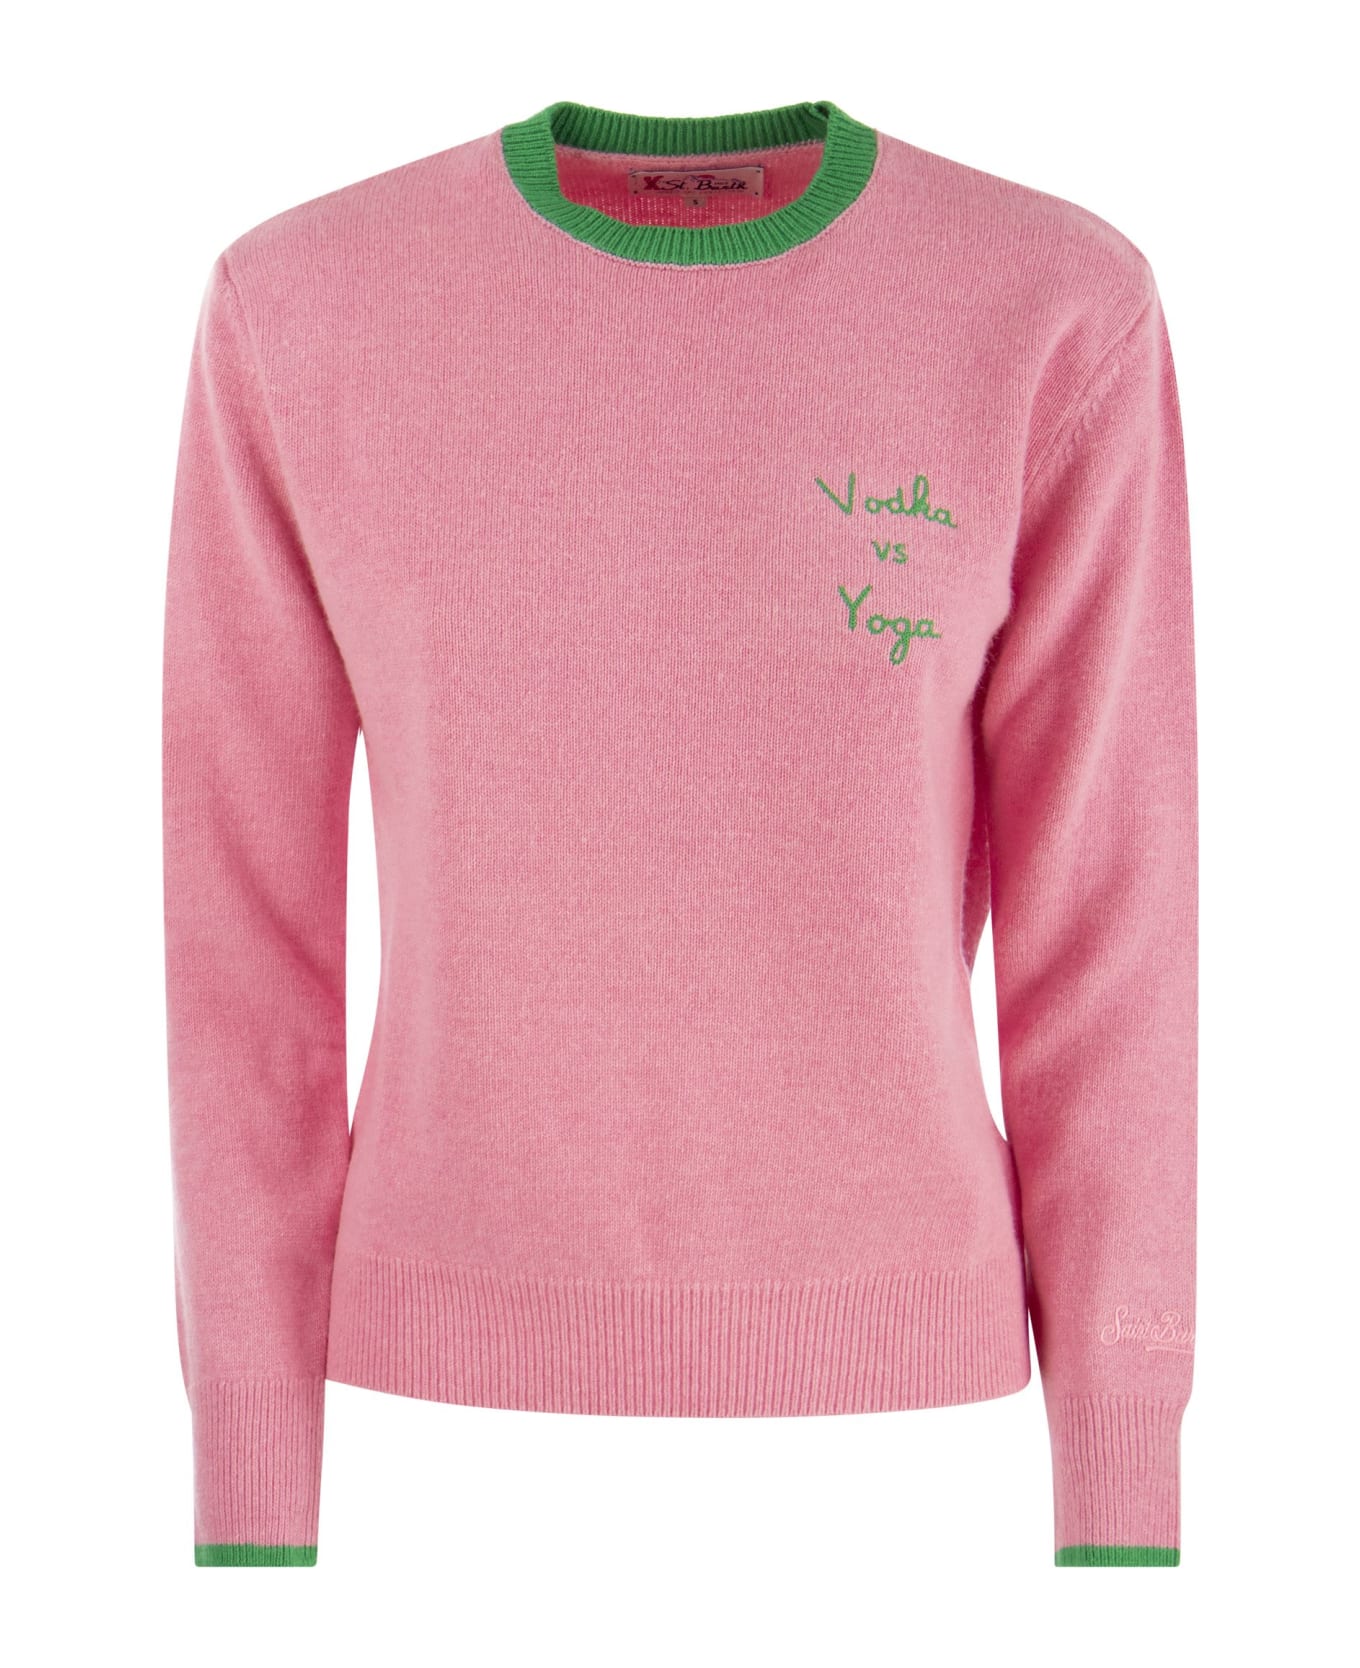 MC2 Saint Barth Wool And Cashmere Blend Jumper With Vodka Vs Yoga Embroidery - Pink ニットウェア